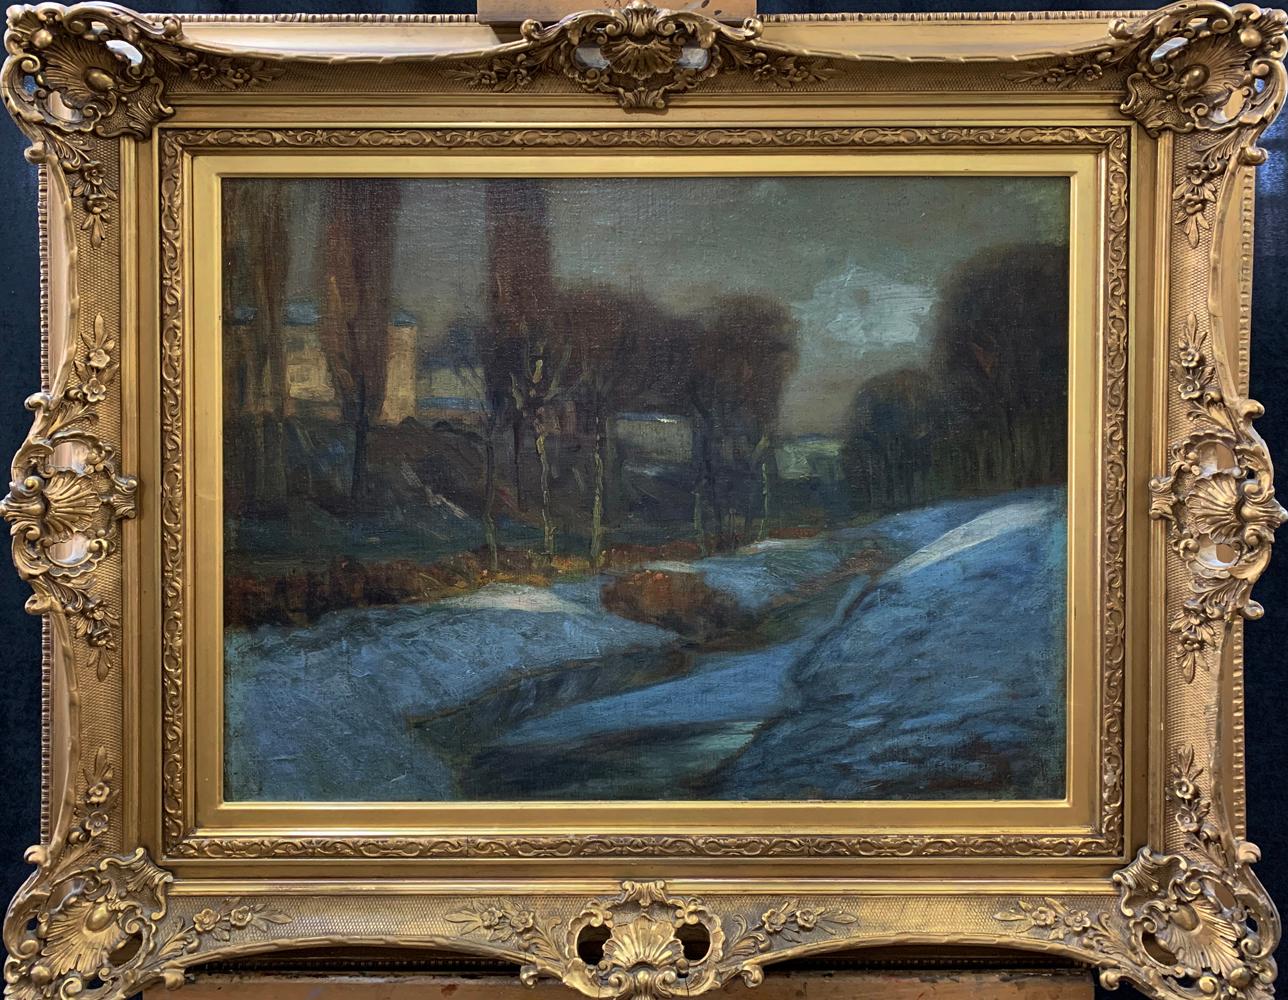 Edward Willis Redfield Landscape Painting - Edward Redfield, Canal in Winter, Oil on Canvas, Period Frame, 1890's